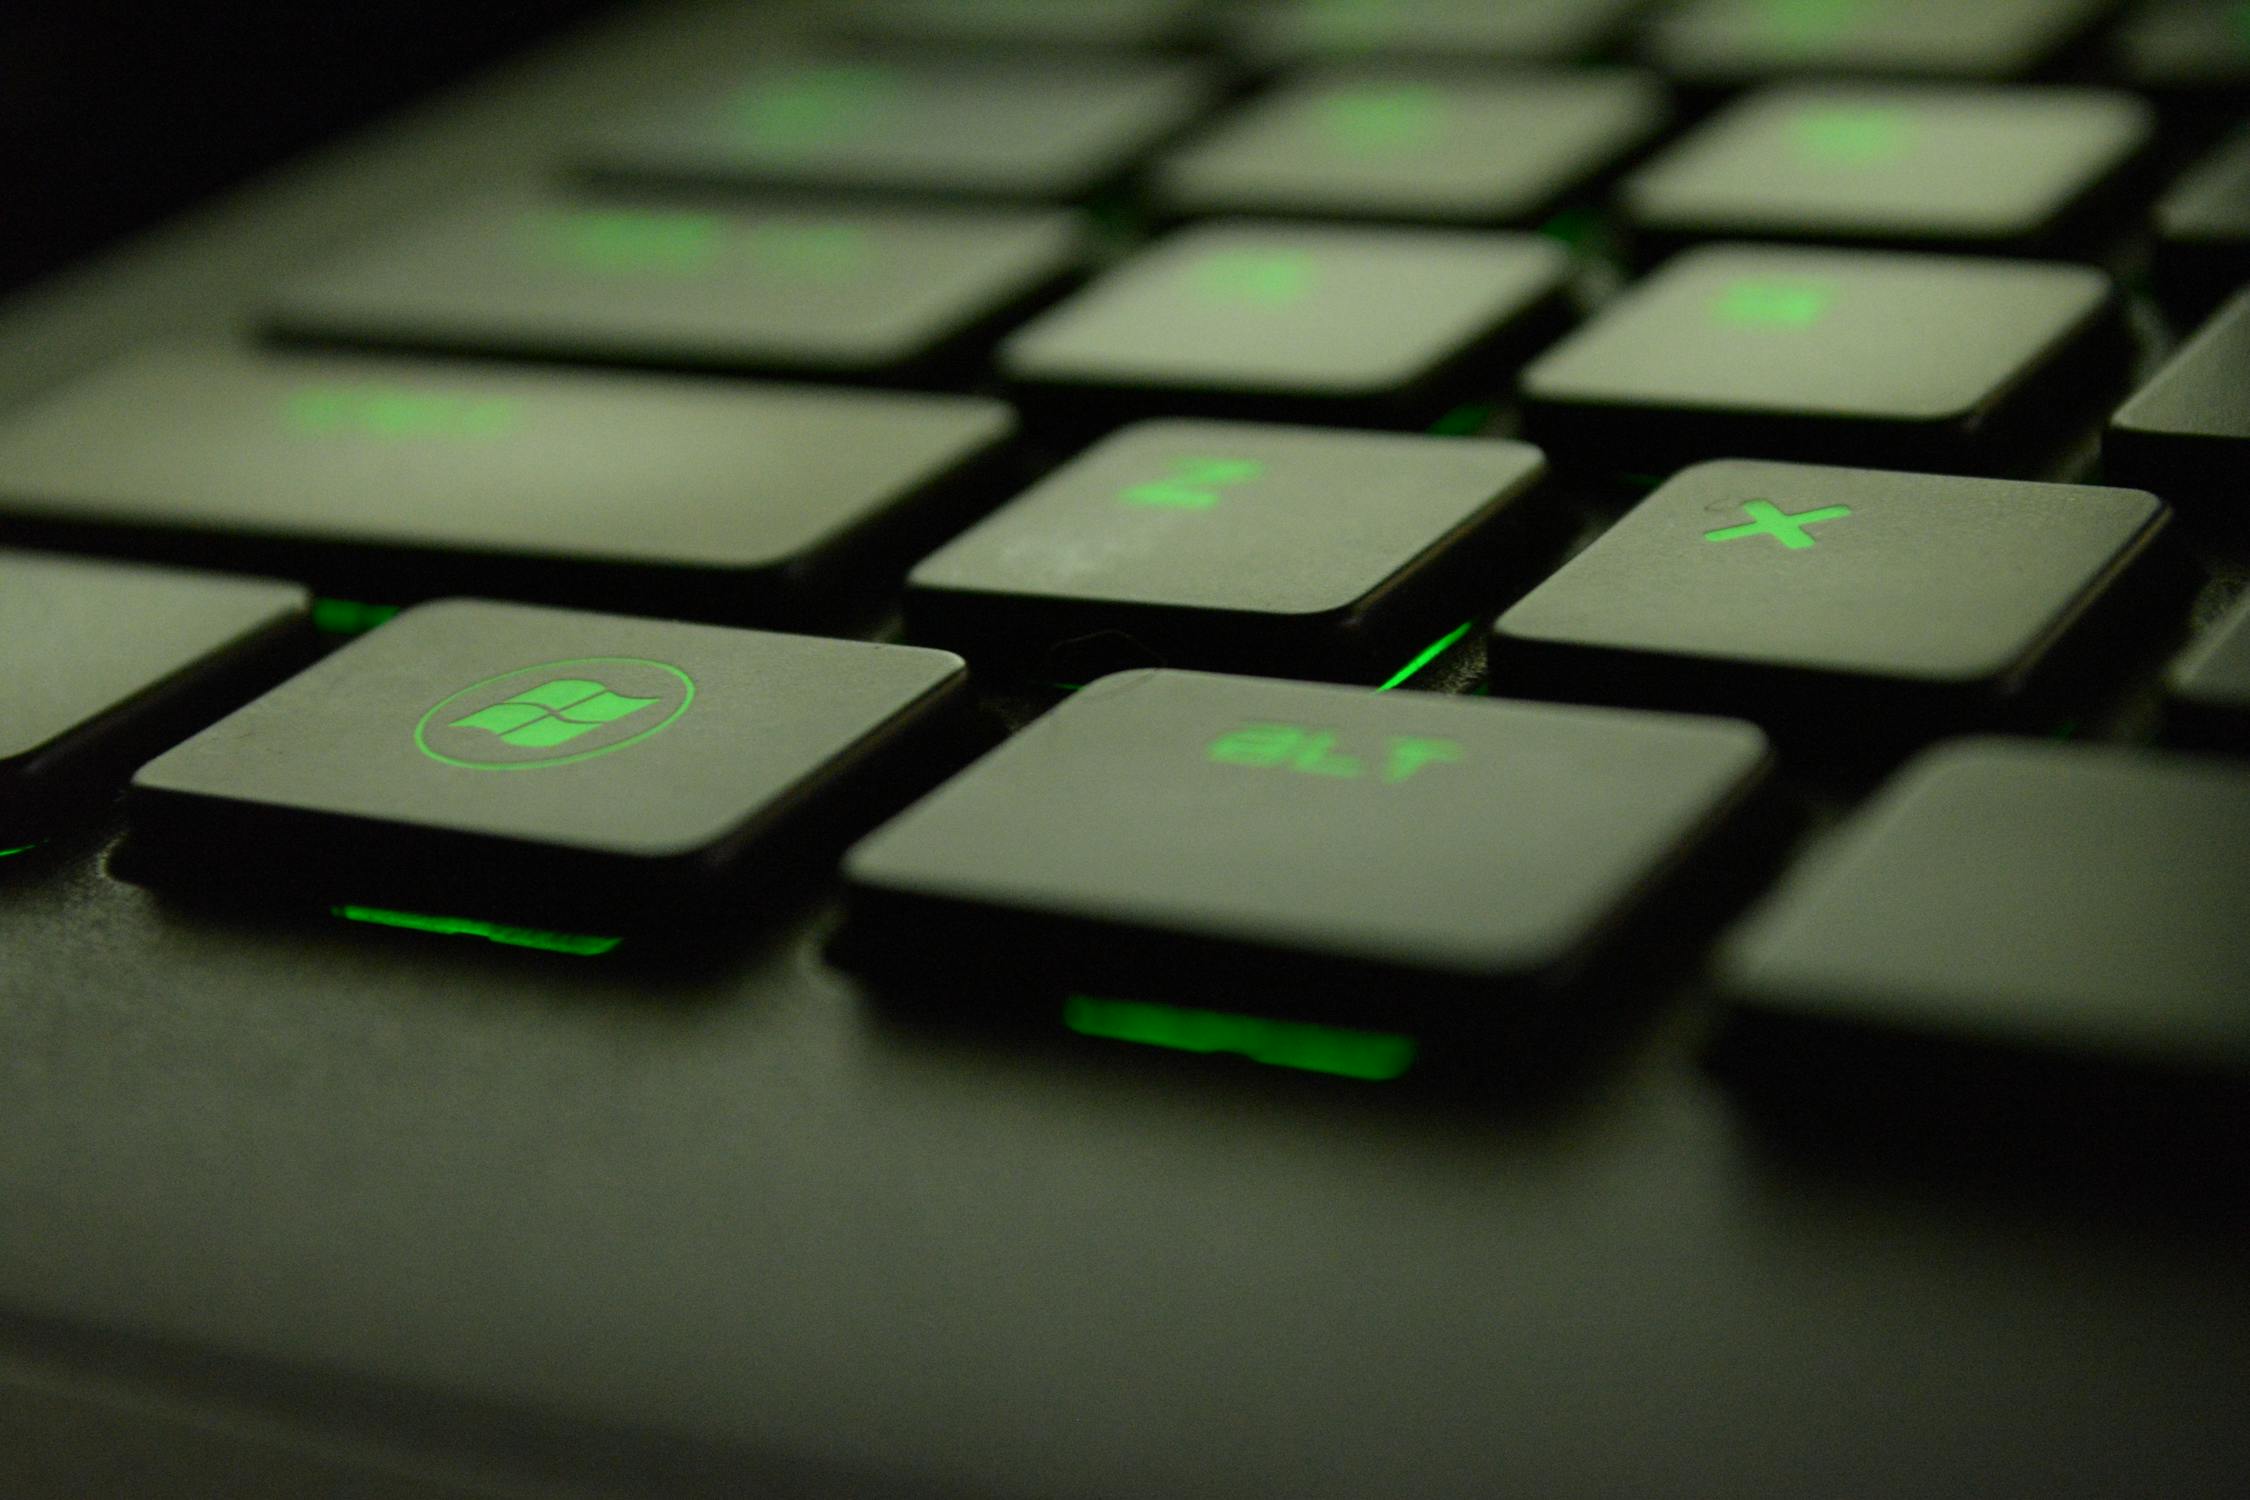 keyboard_with_green_light